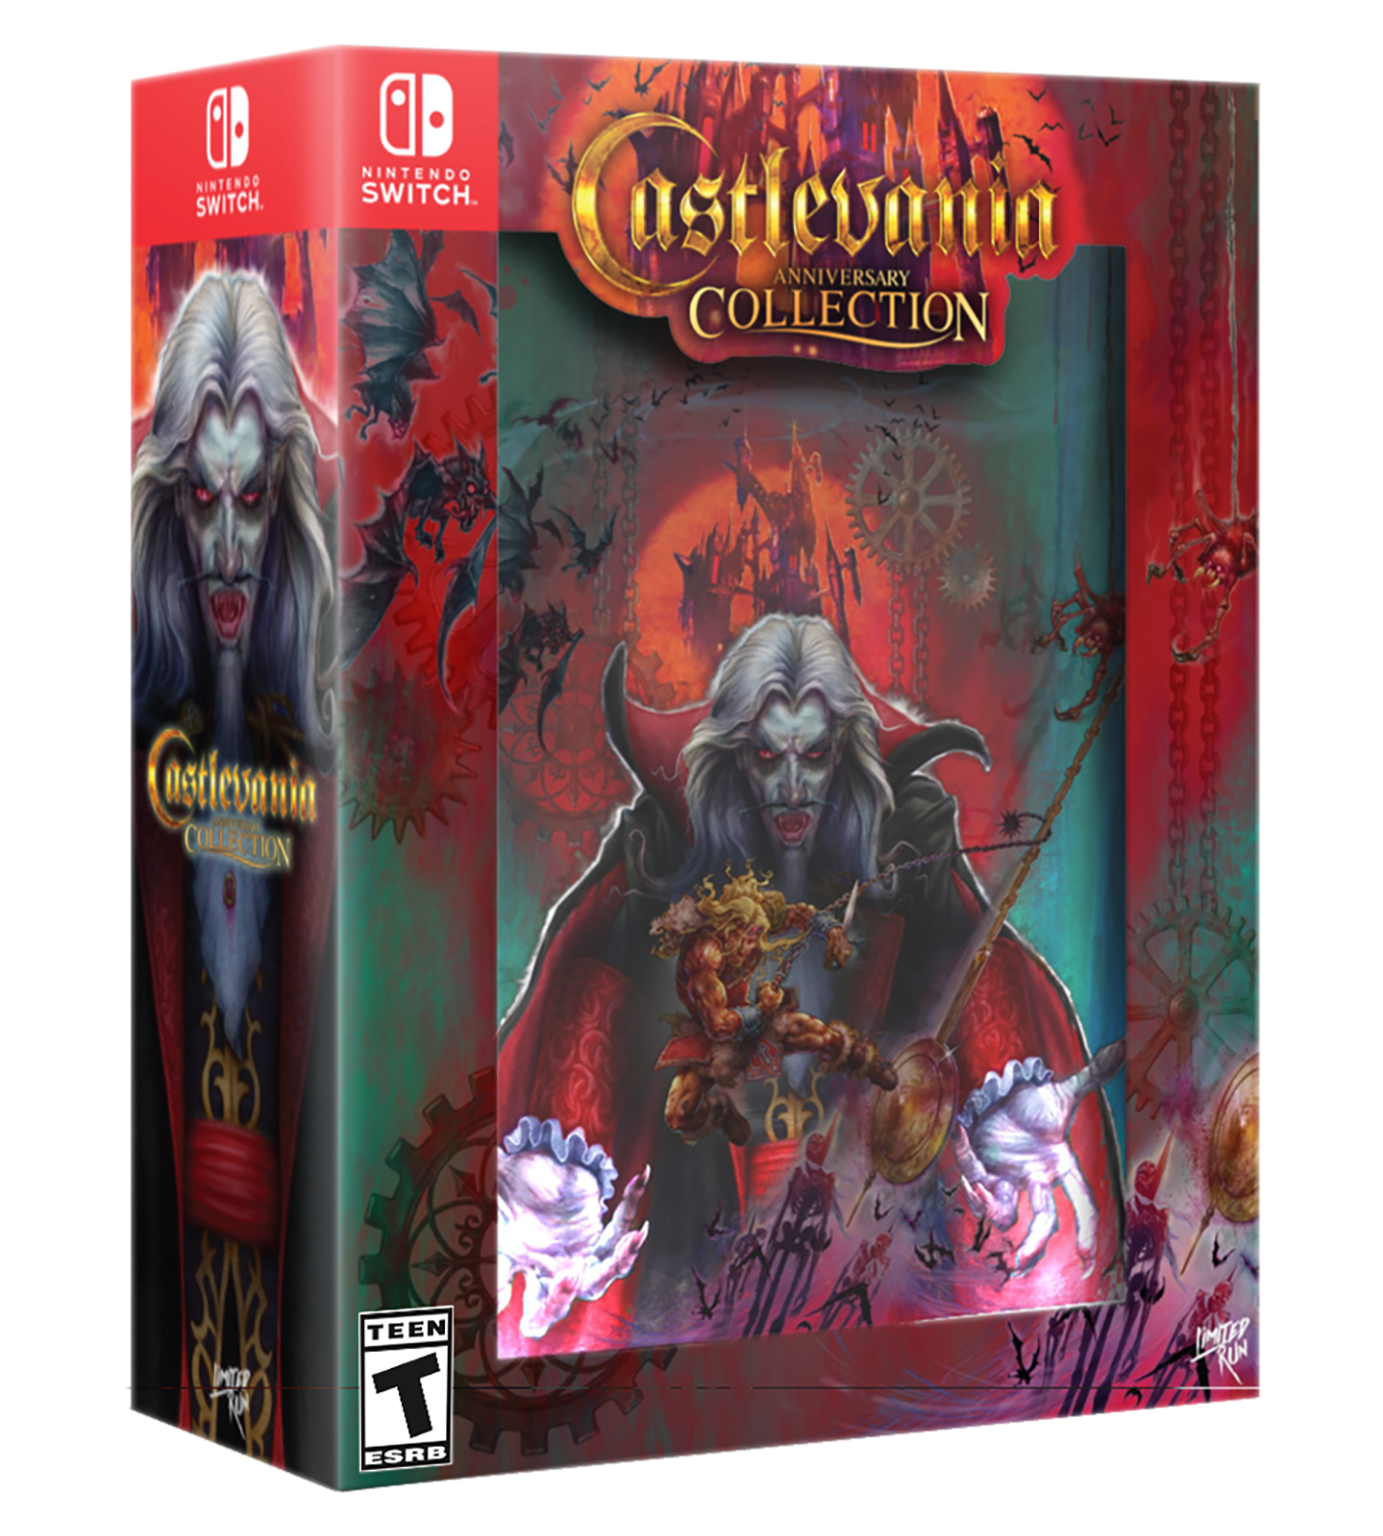 Castlevania collection Switch. Castlevania Anniversary Nintendo Switch. Castlevania Advance collection Switch.